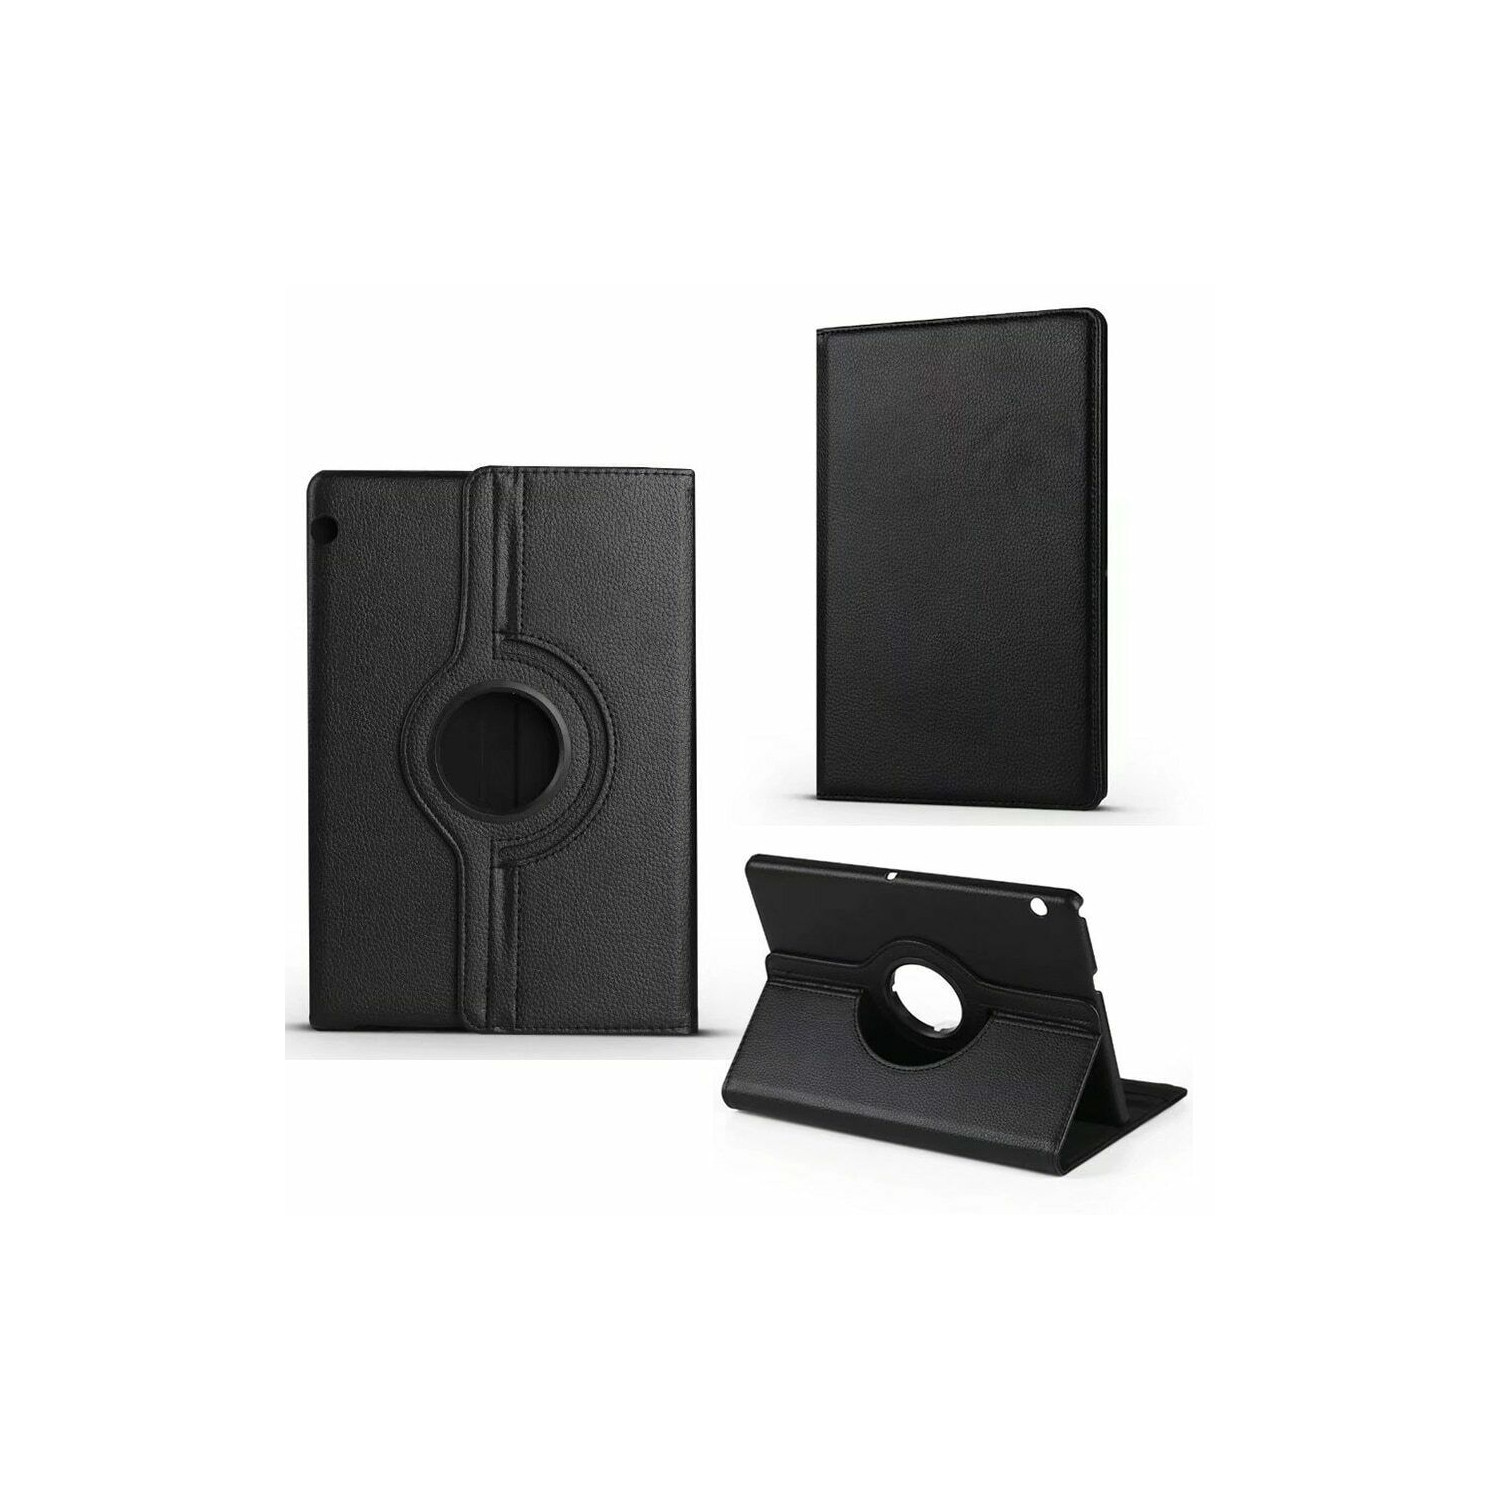 【CSmart】 360 Rotating PU Leather Stand Case Smart Cover for Huawei Mediapad T3 10", Black